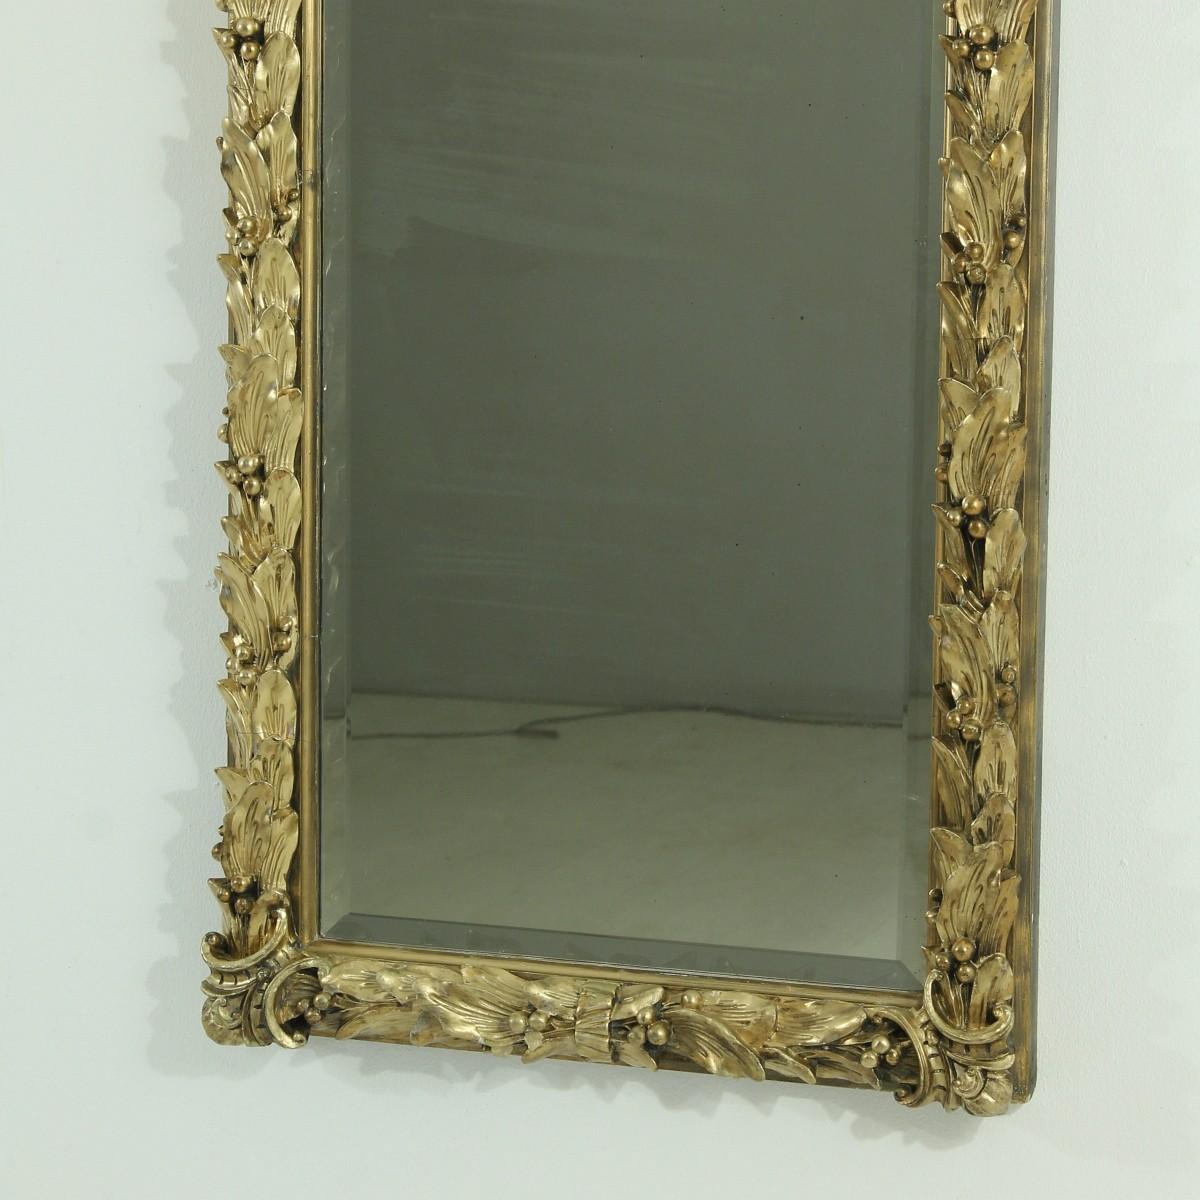 - Faceted mirror glass
- Stable wooden frame with applied floral stucco.